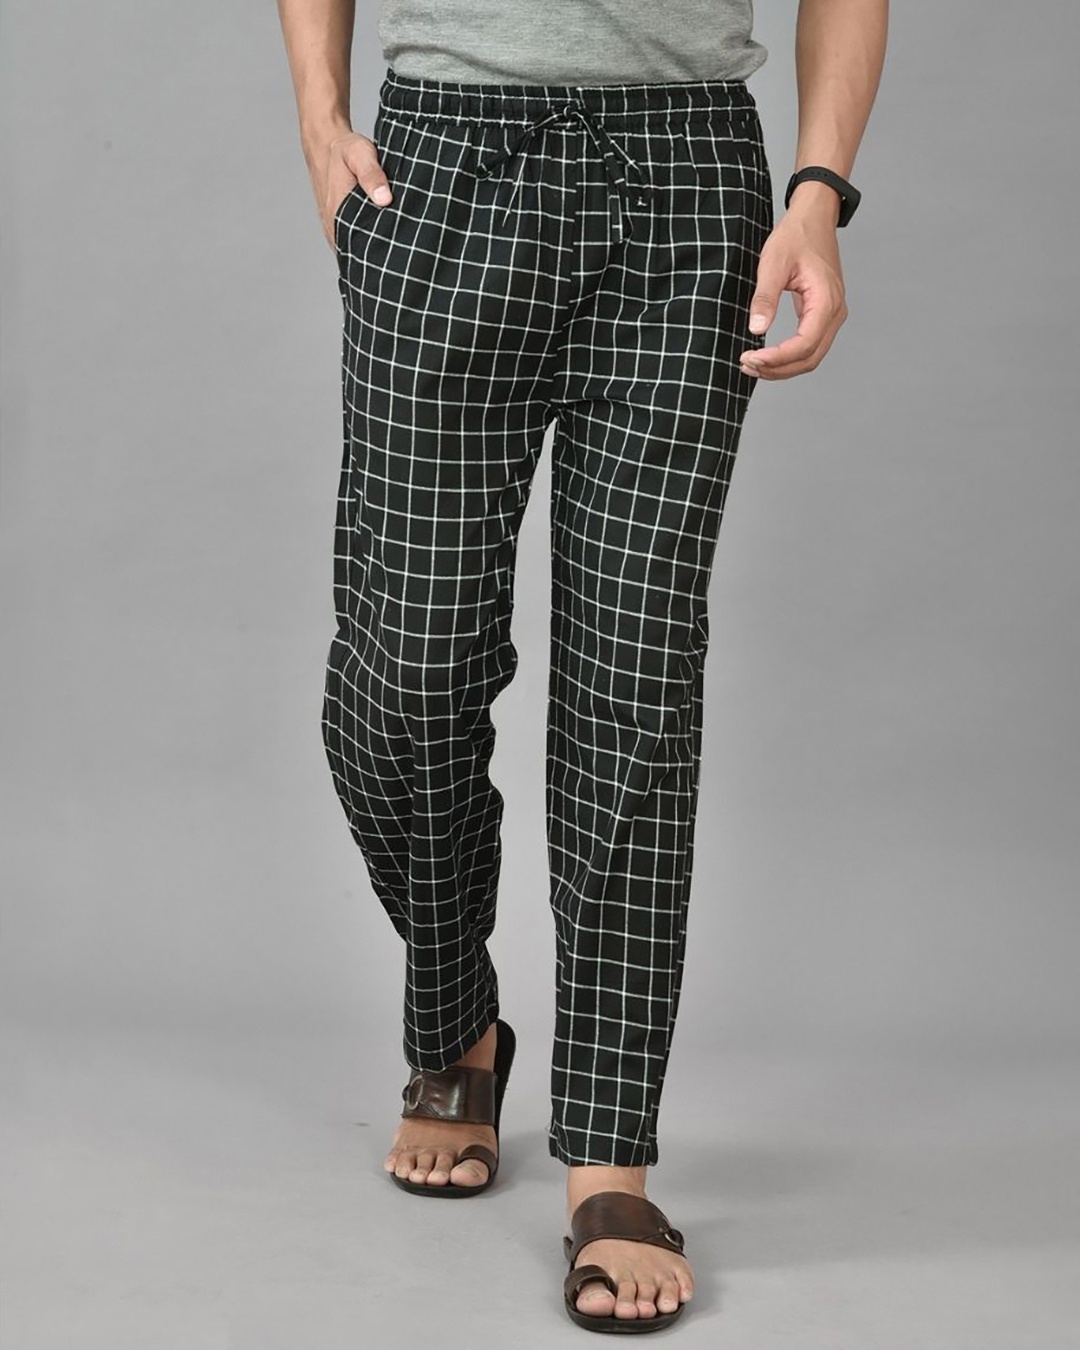 Autumn Mens Checked Trousers Formal Smart Casual Office Business Dress Pants  Elastic Straight Plaid Male Pants Plus Size From Brry, $36.31 | DHgate.Com